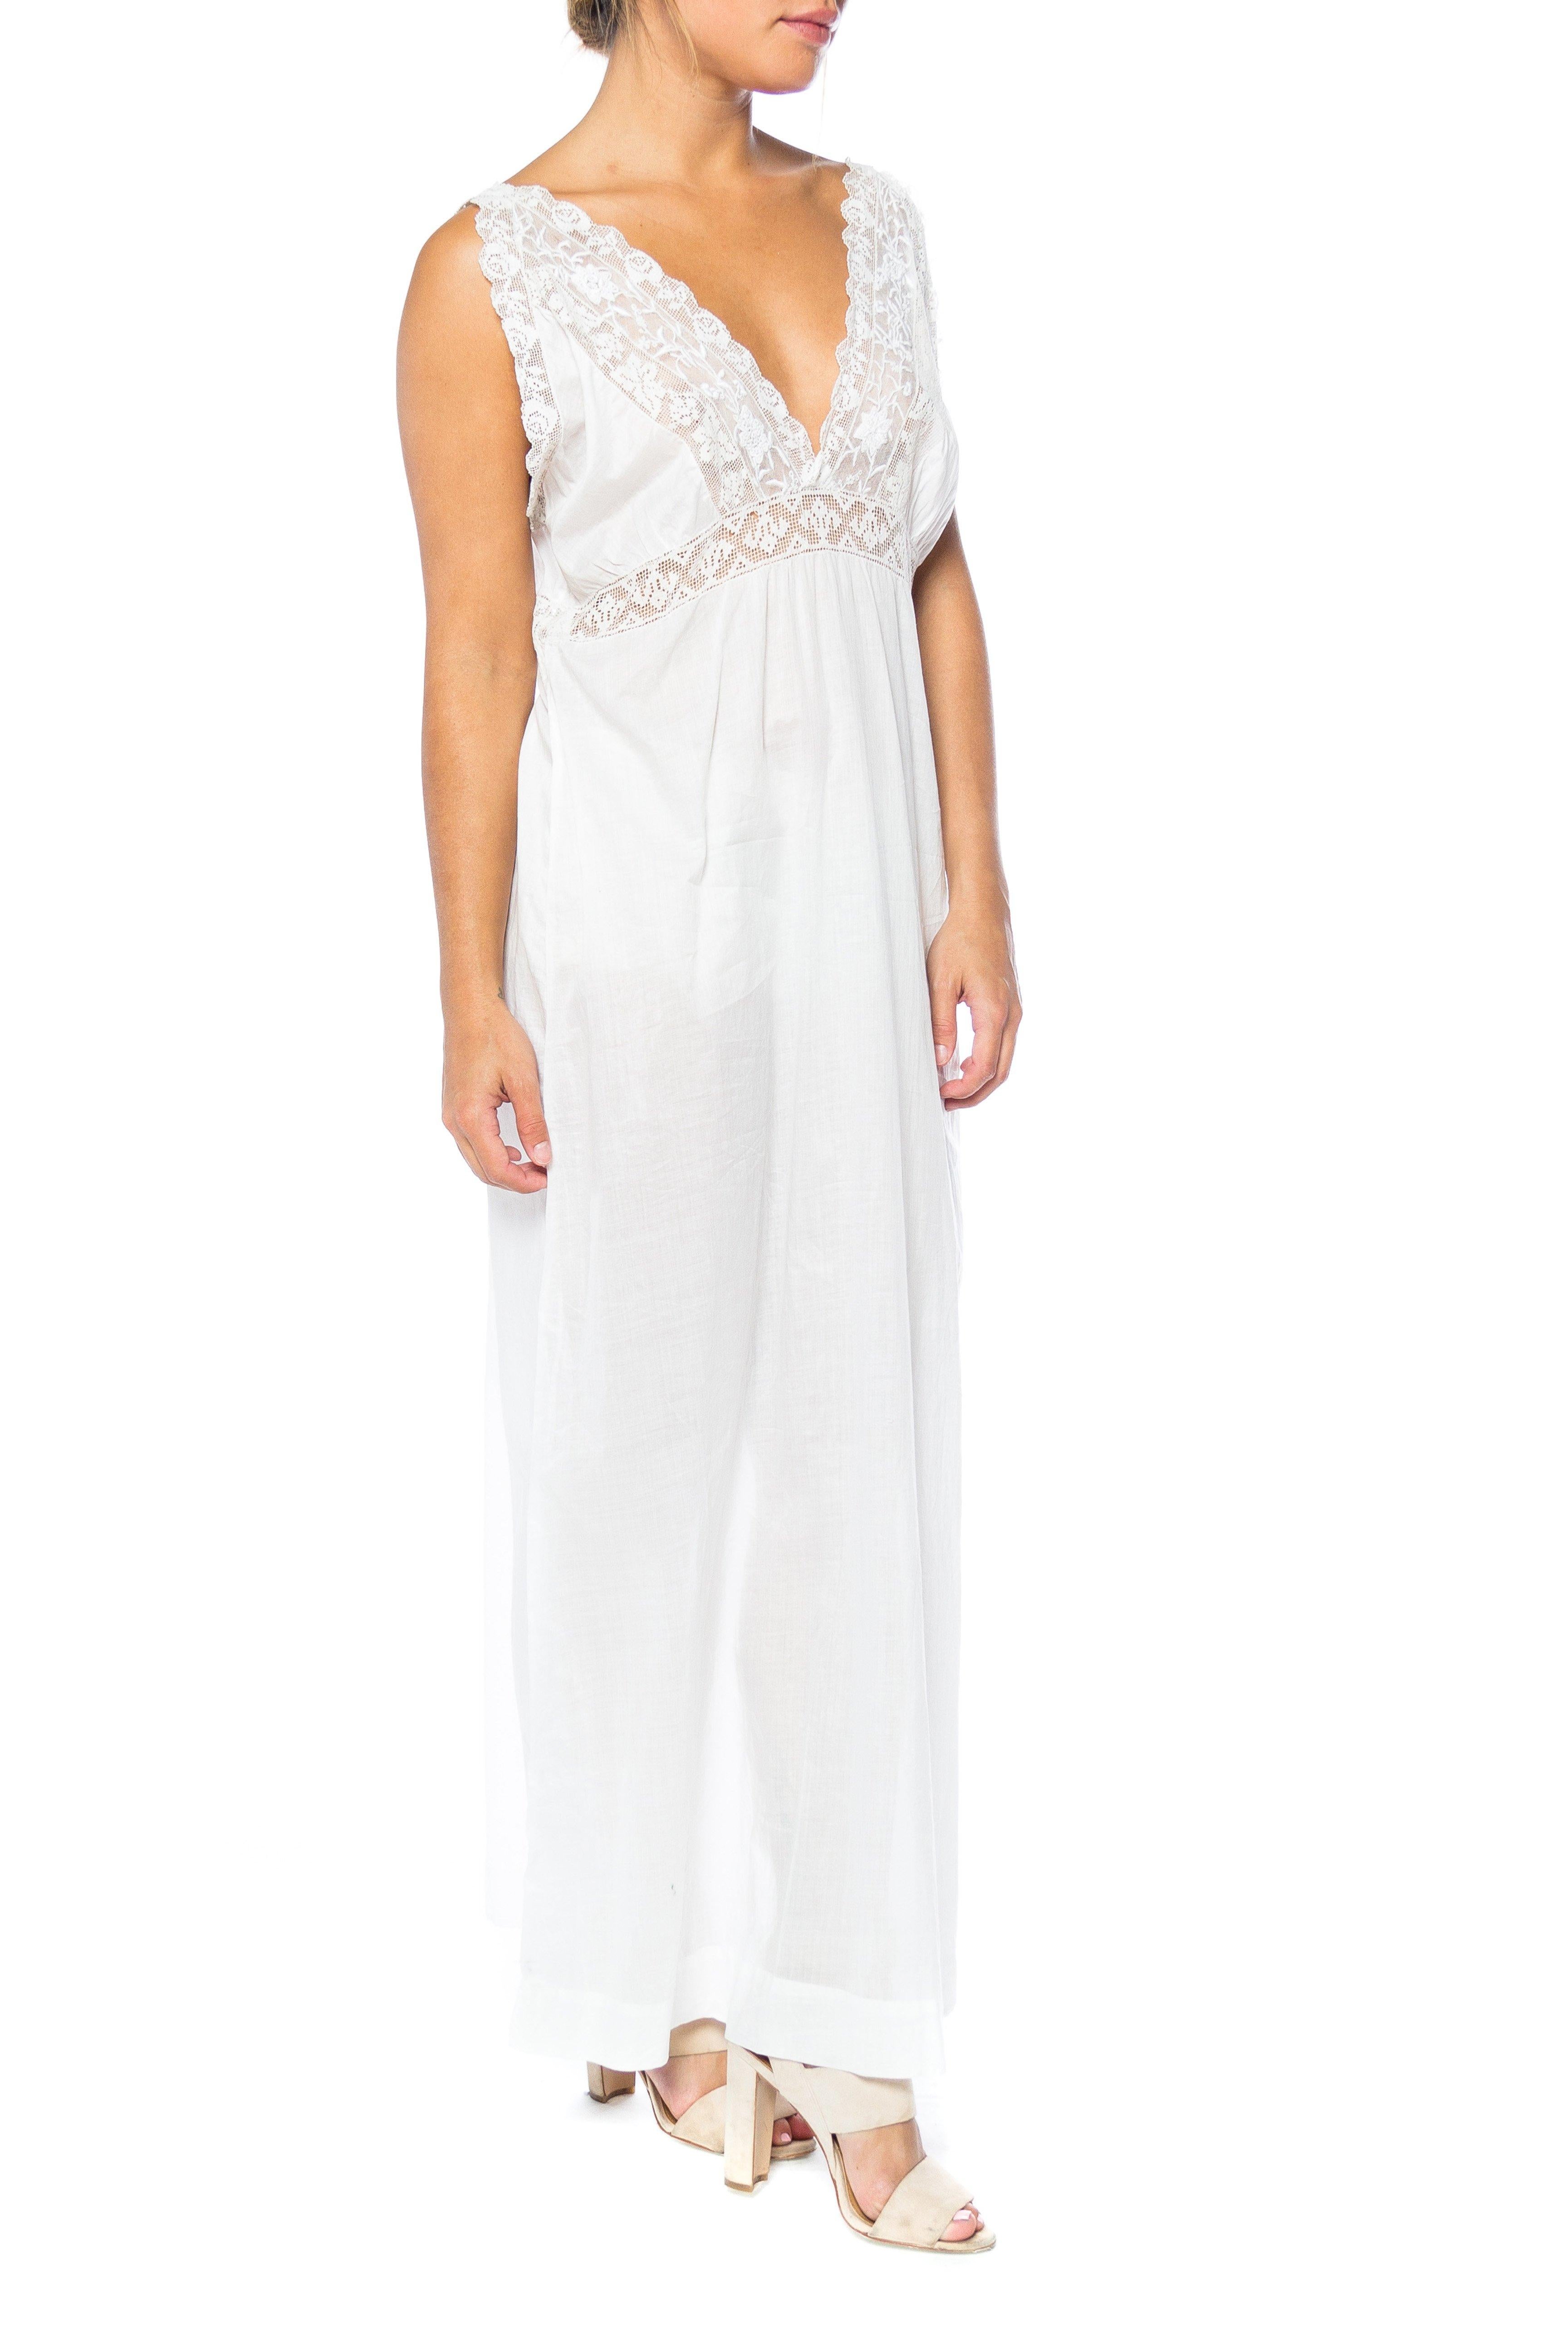 lace nightgown dress